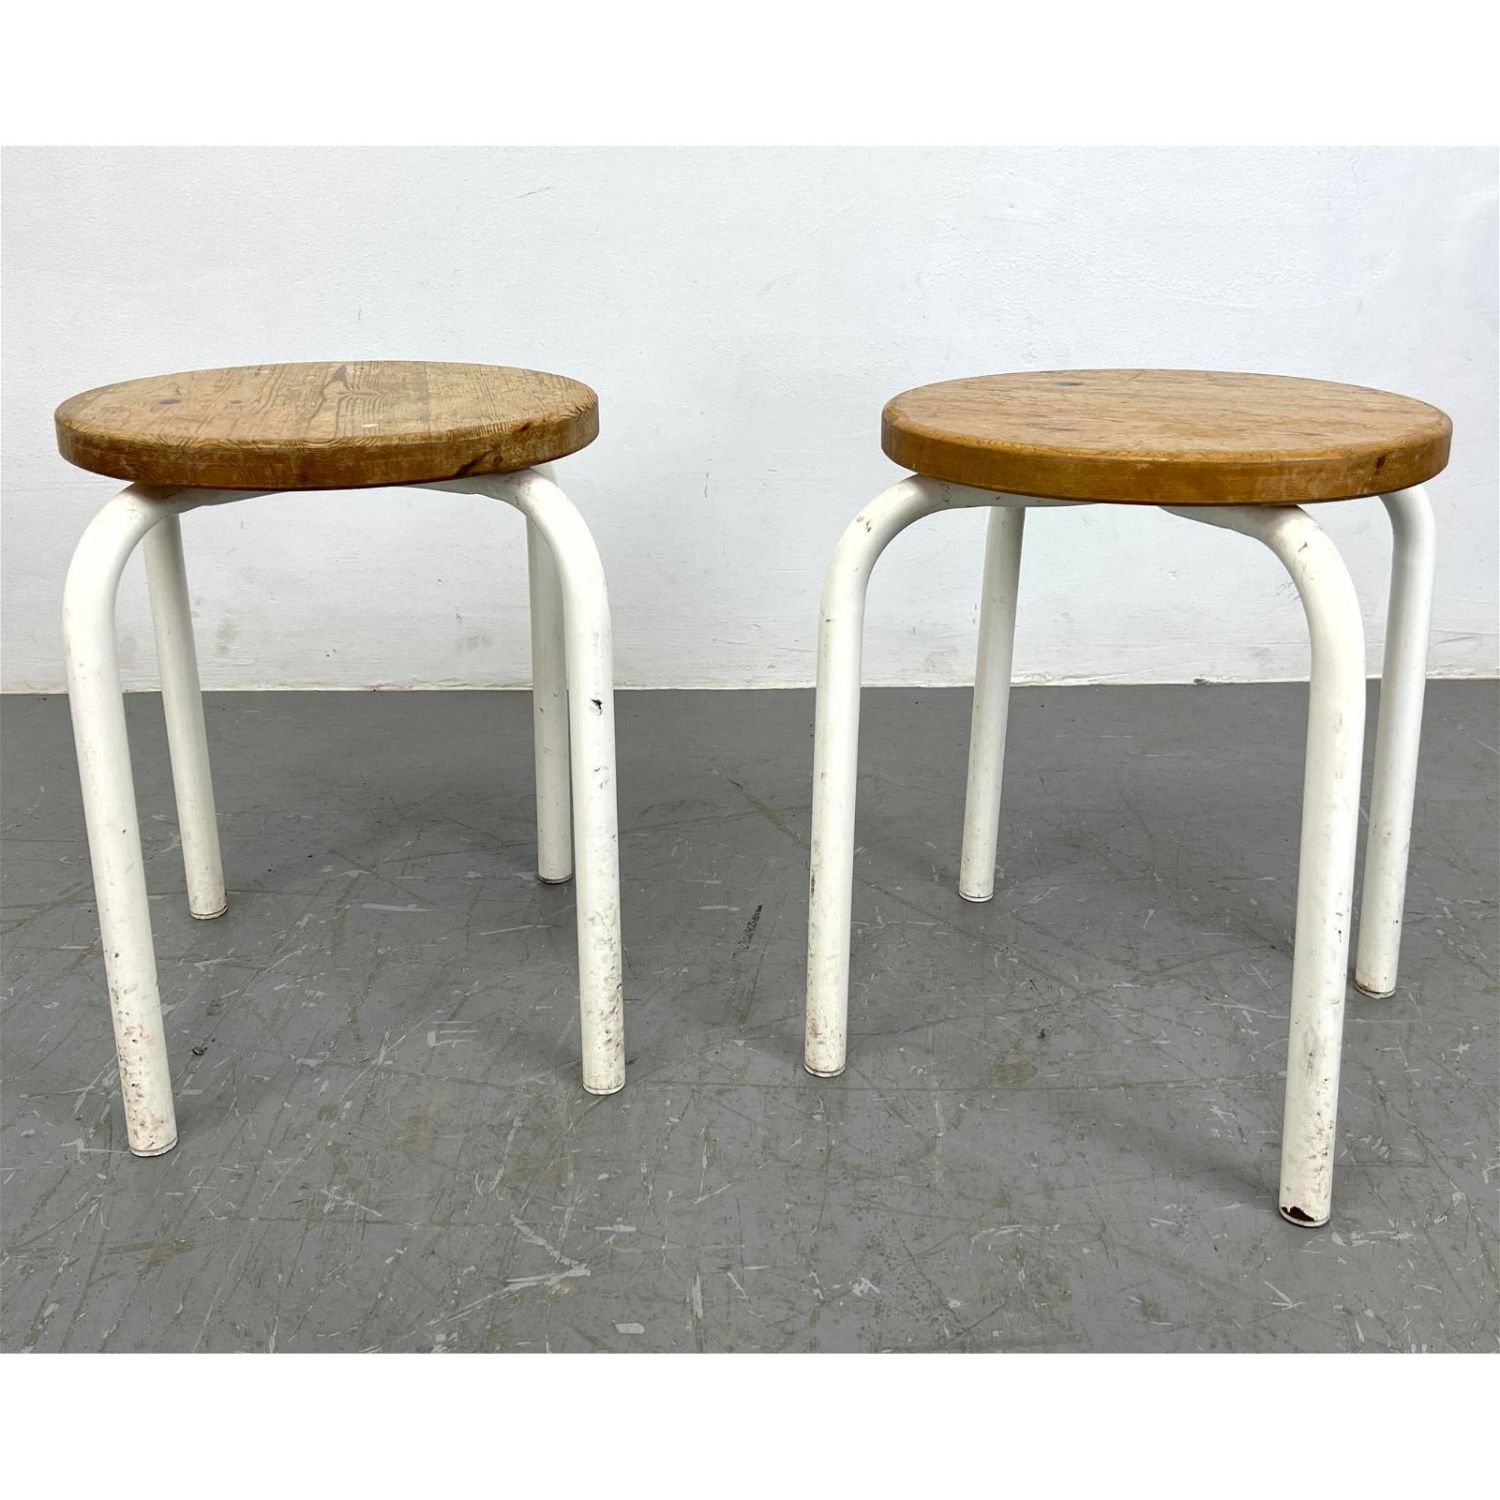 Pr Tubax Stacking Stools with Pine 362a4a